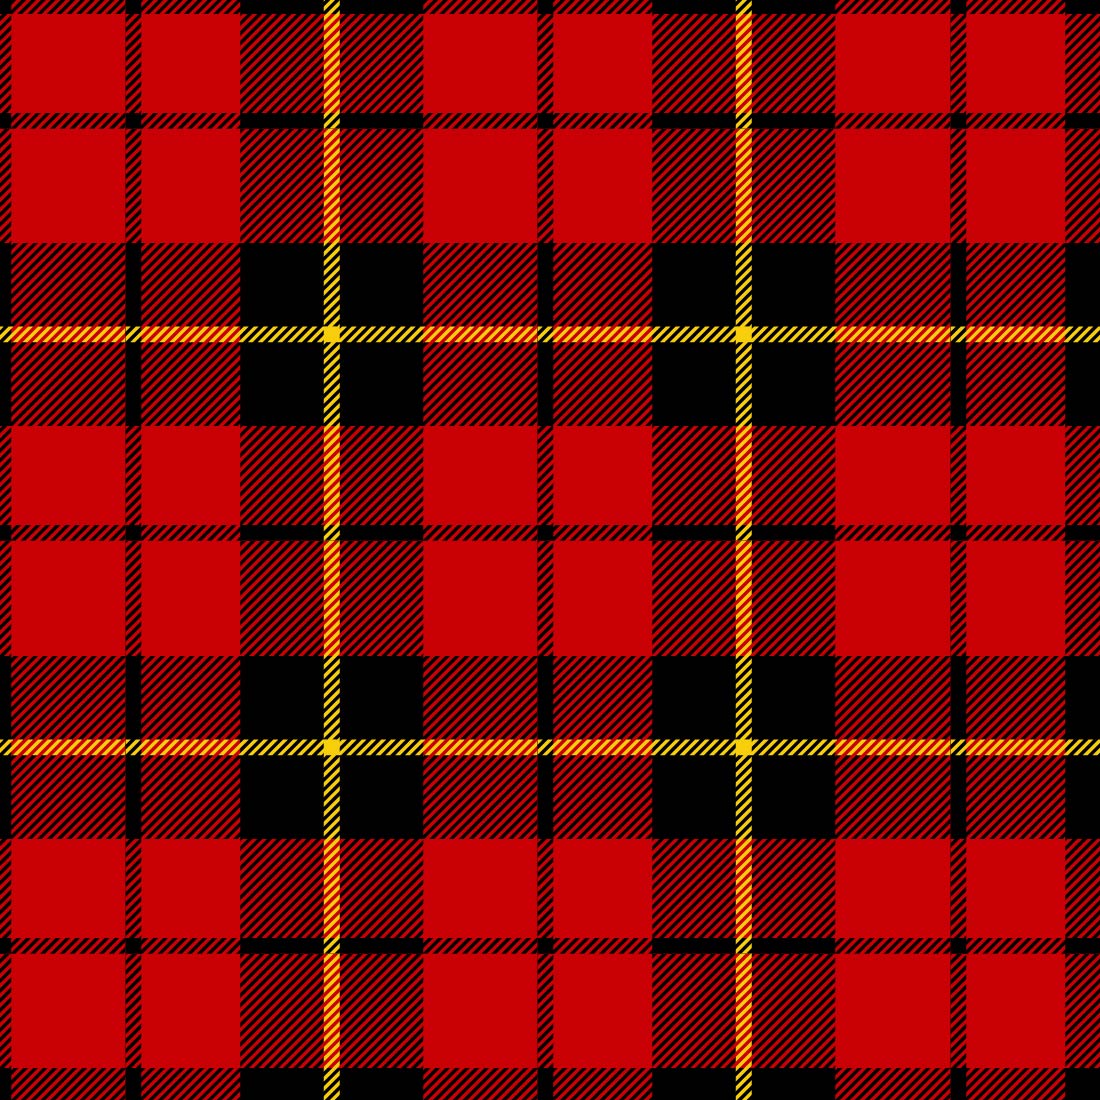 Red Color Tartan Plaid Clan Wallace Design Pattern for Fabrics, Textiles and Backgrounds cover image.